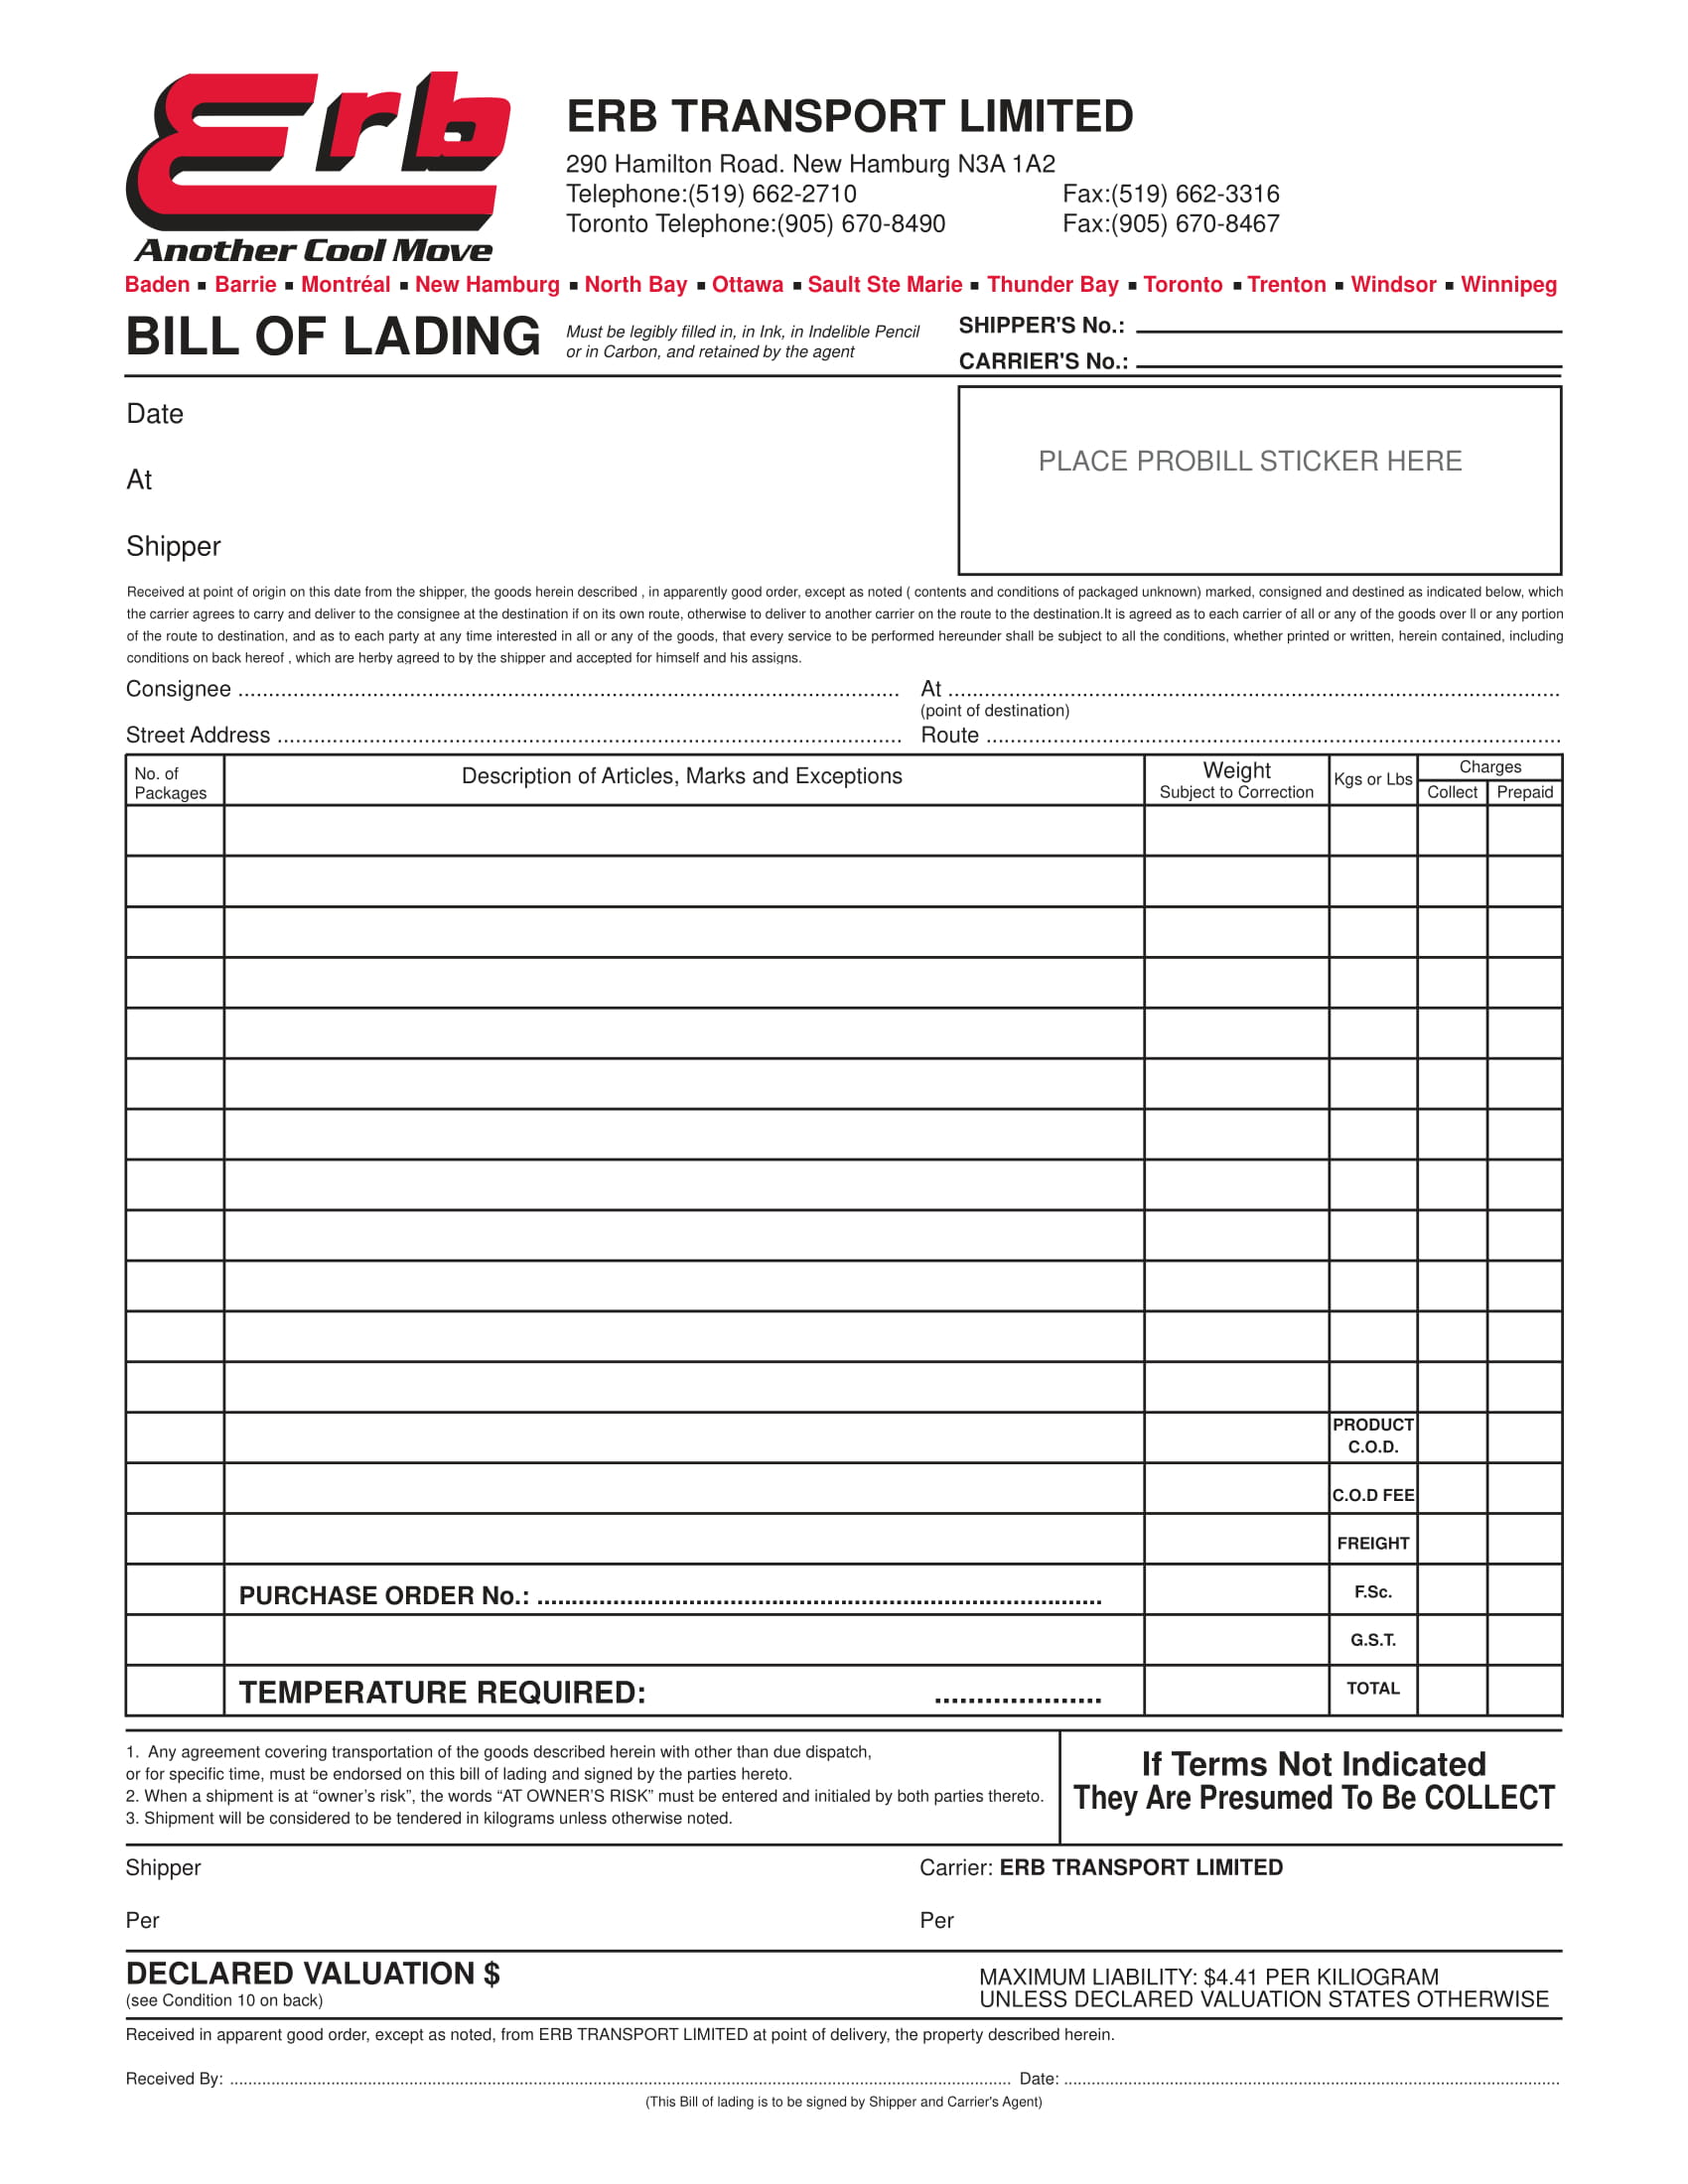 ERB Transport Limited Bill of Lading Example